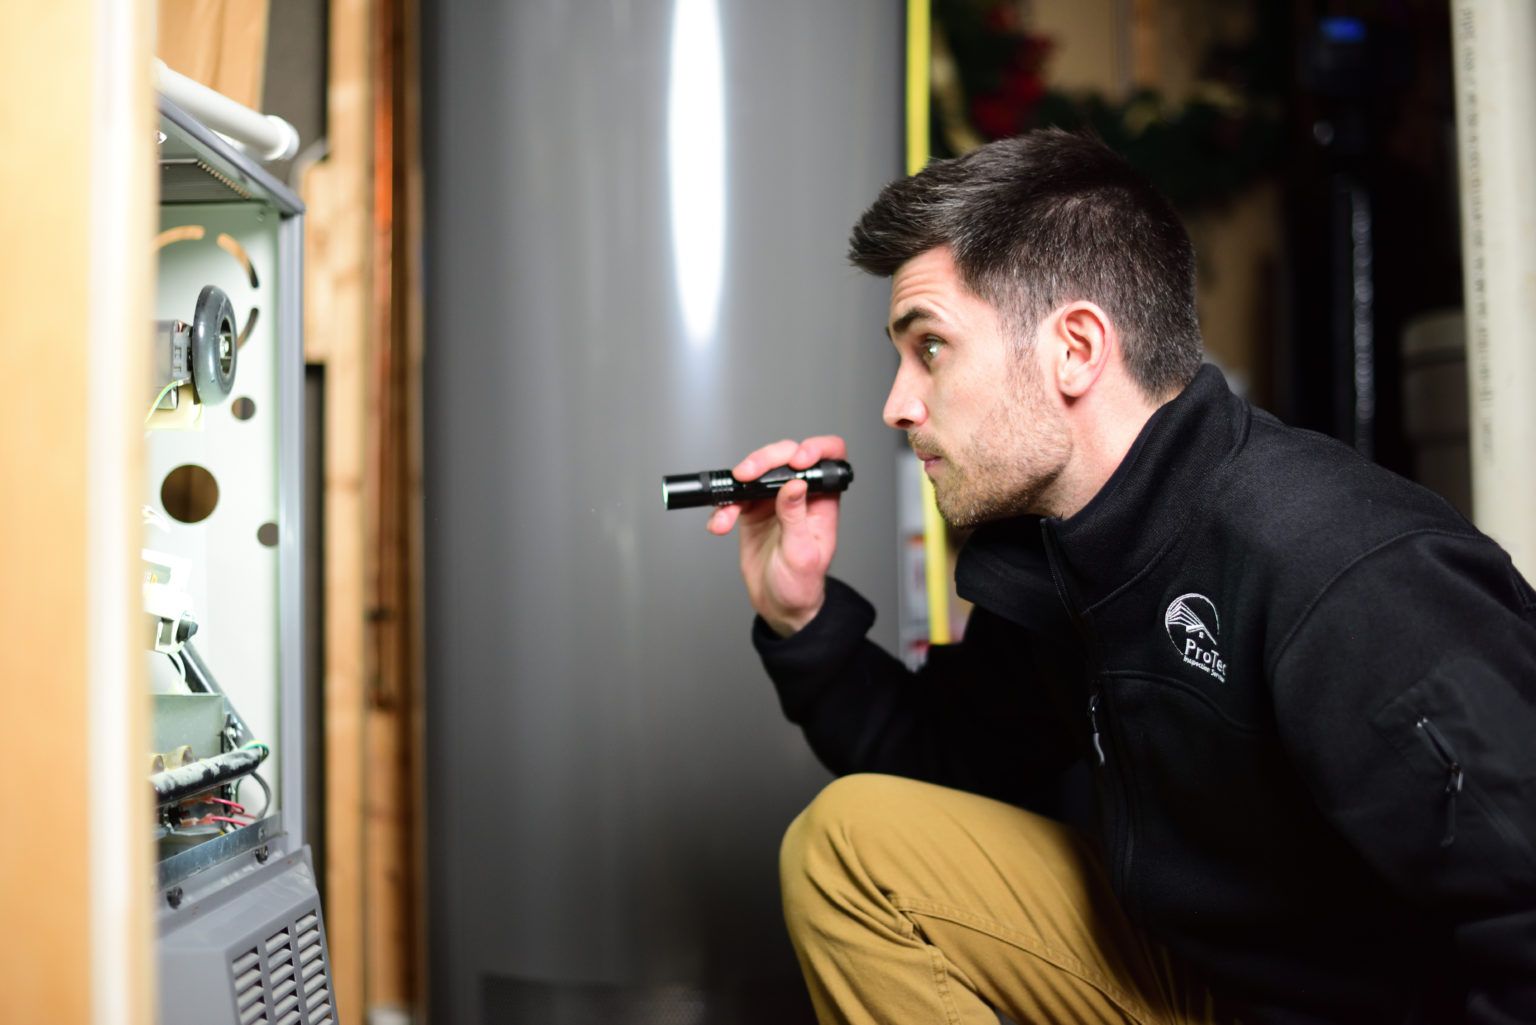 A man is looking at a water heater with a flashlight.